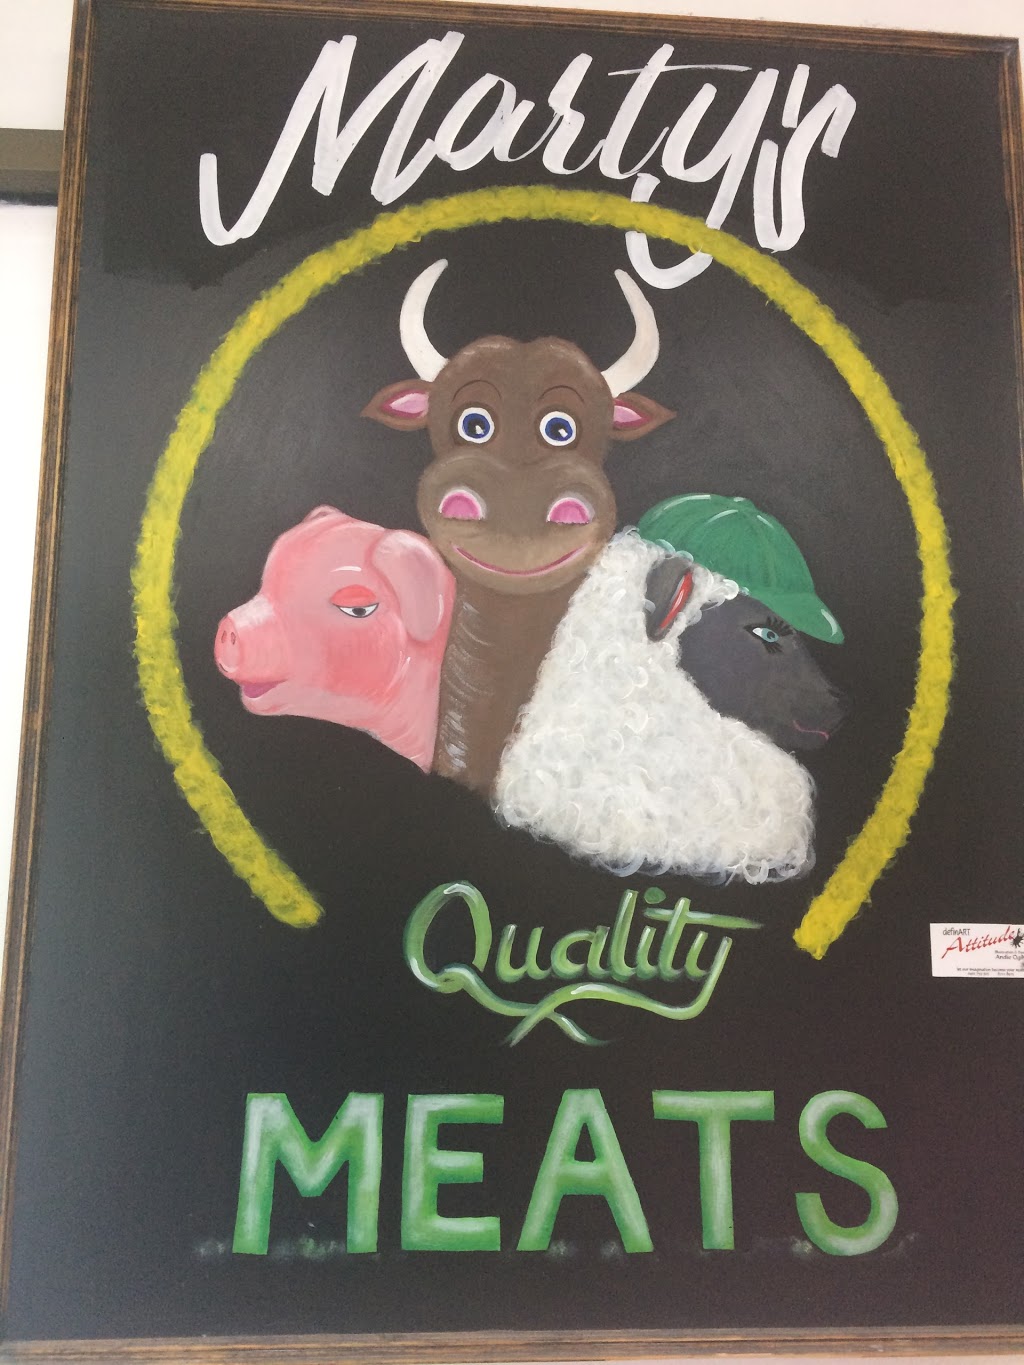 Martys Meats | store | Shop 13/101 Station St, Ferntree Gully VIC 3156, Australia | 0397581069 OR +61 3 9758 1069